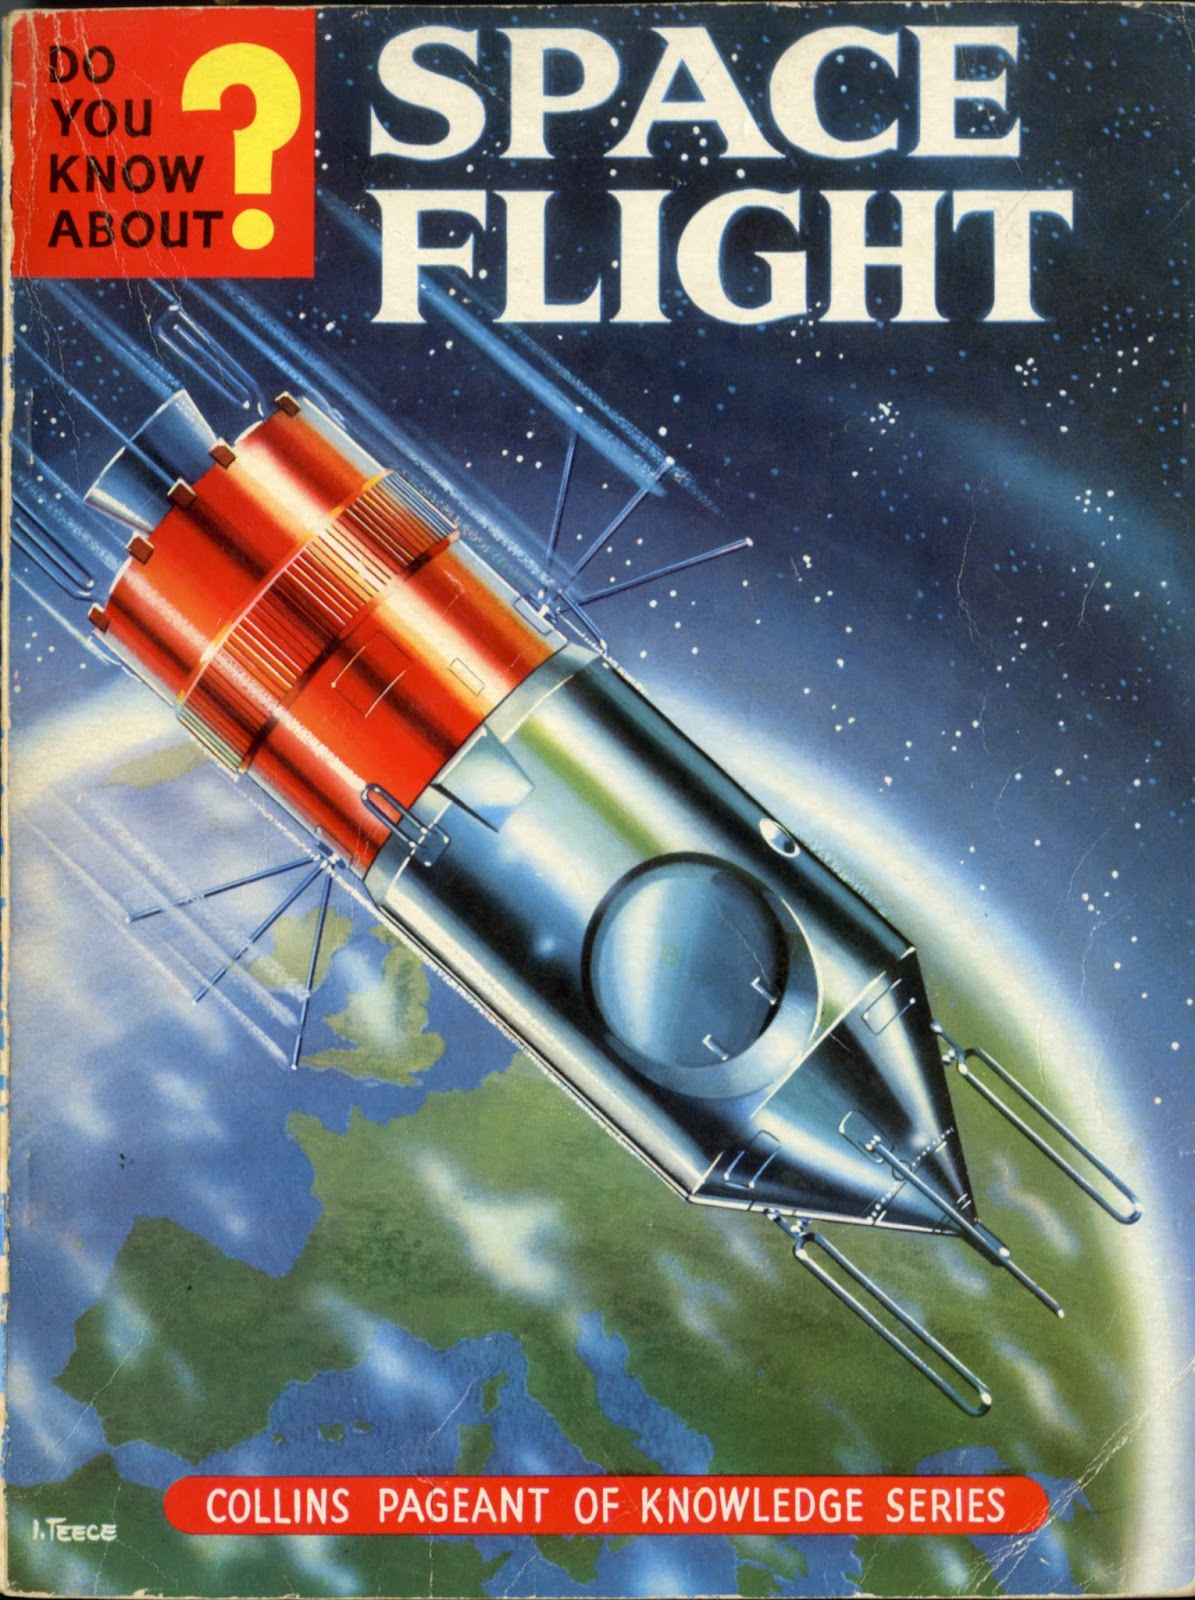 Dreams Of Space Books And Ephemera Do You Know About Spaceflight 1962 Part 1